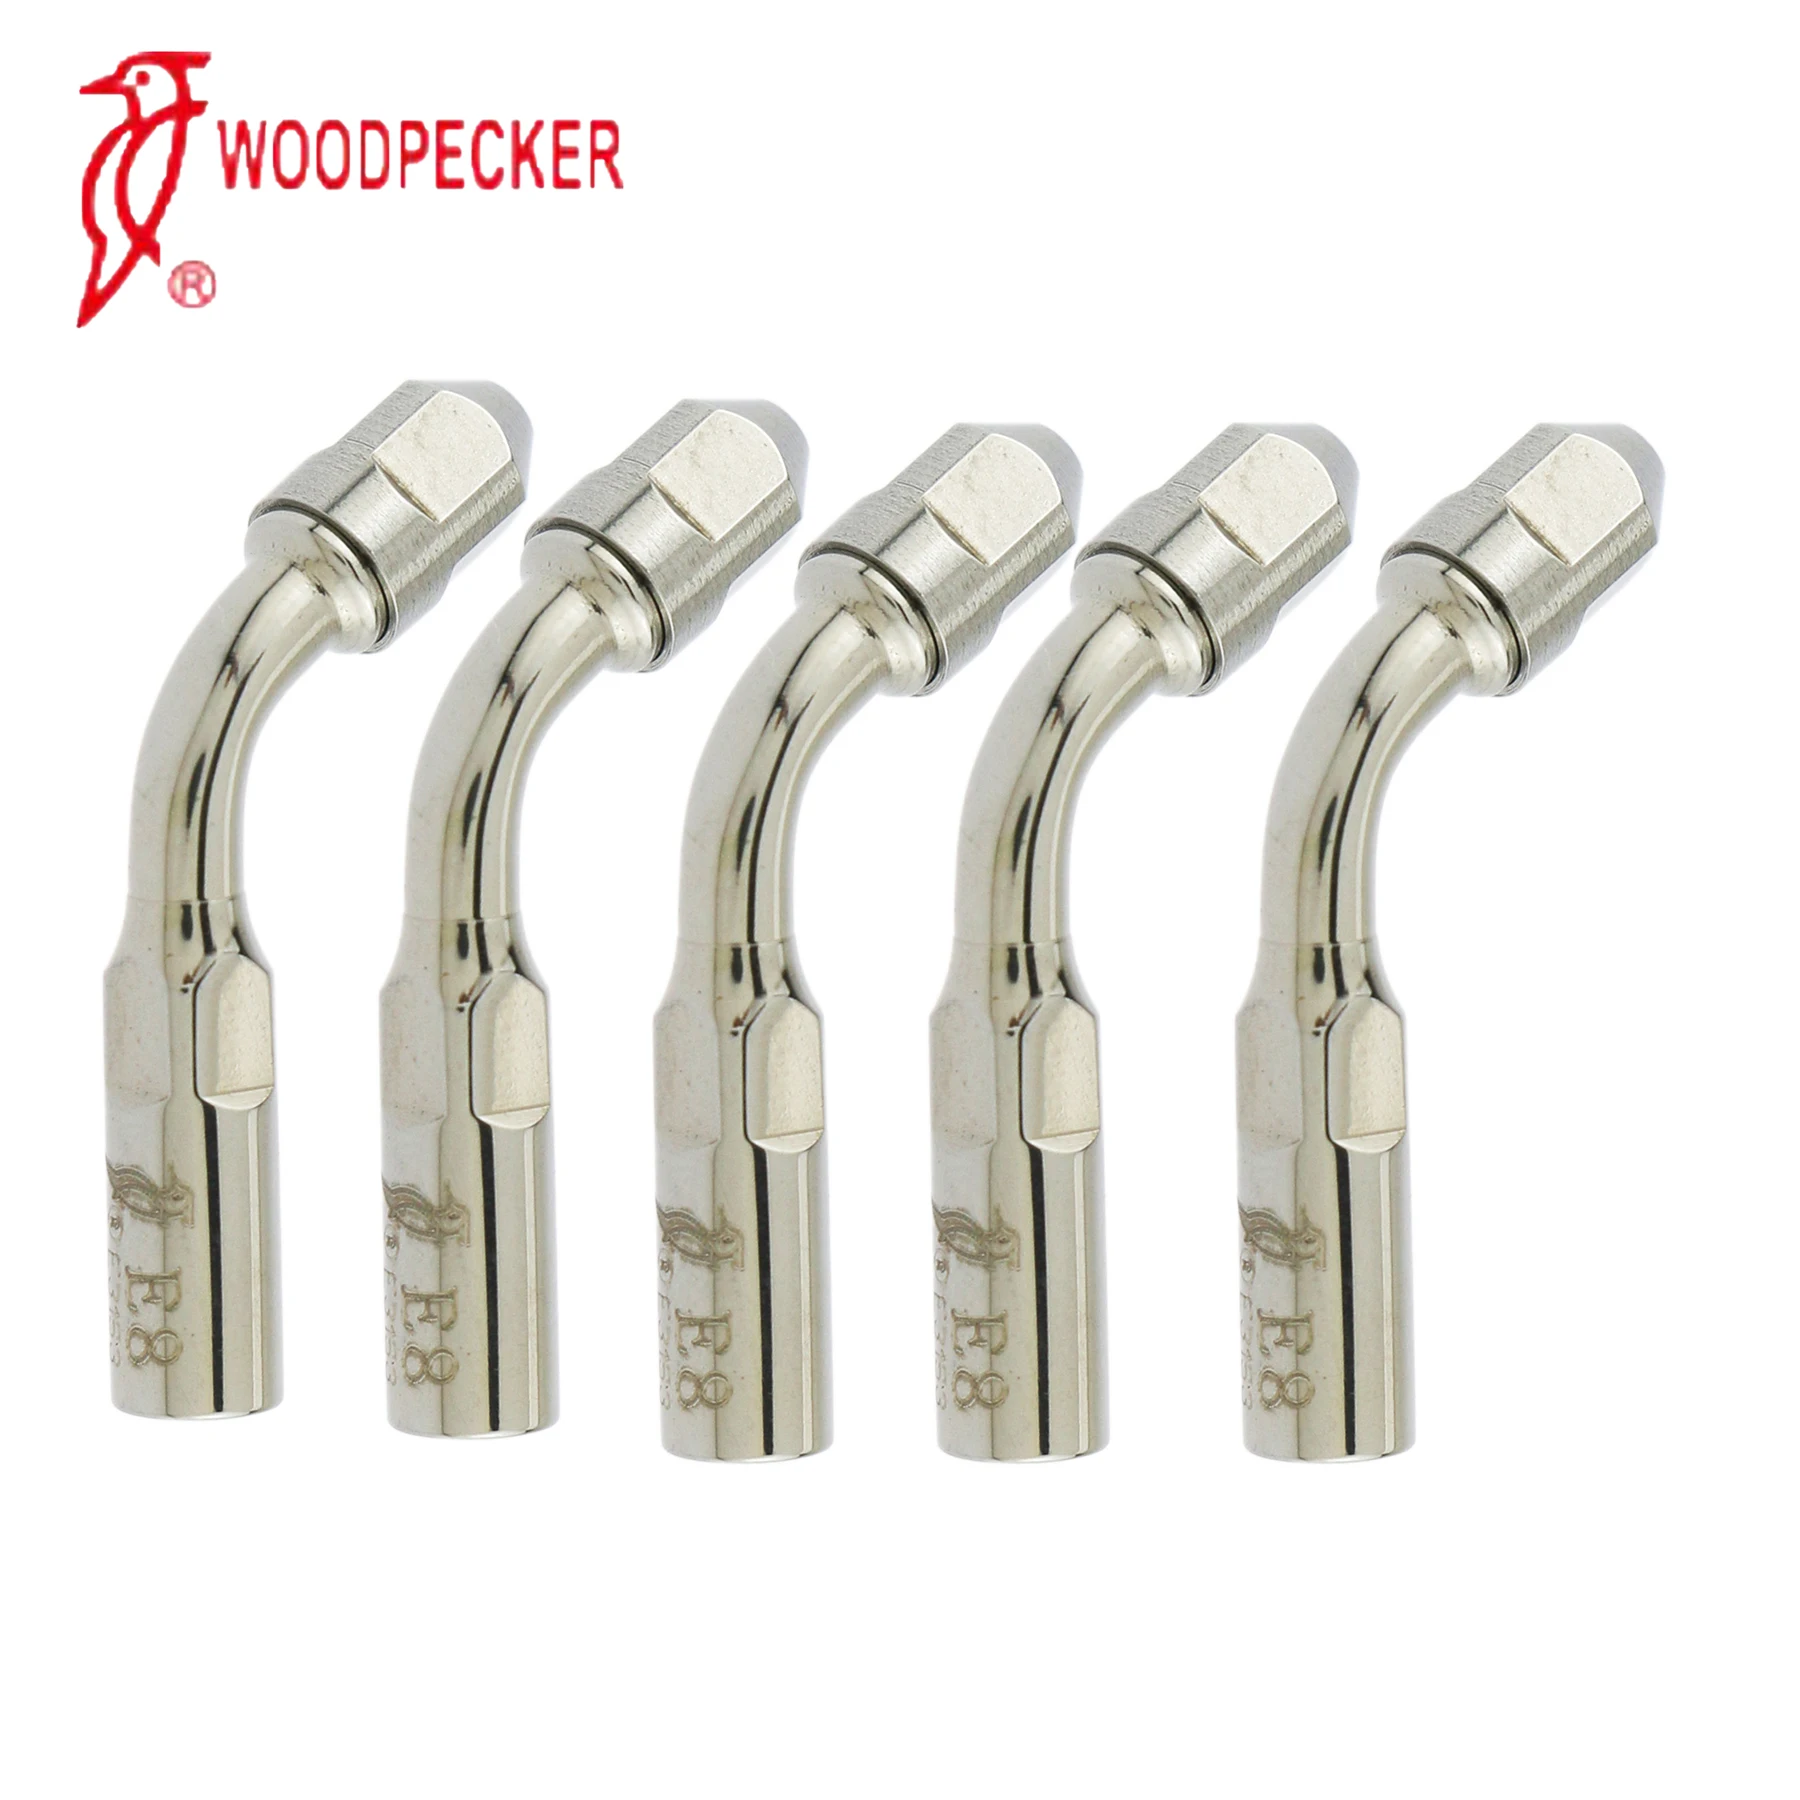 Woodpecker Dental Ultrasonic Scaler Tips Endodontic Endo Tip Scaling  E8 Series Compatible With UDS EMS